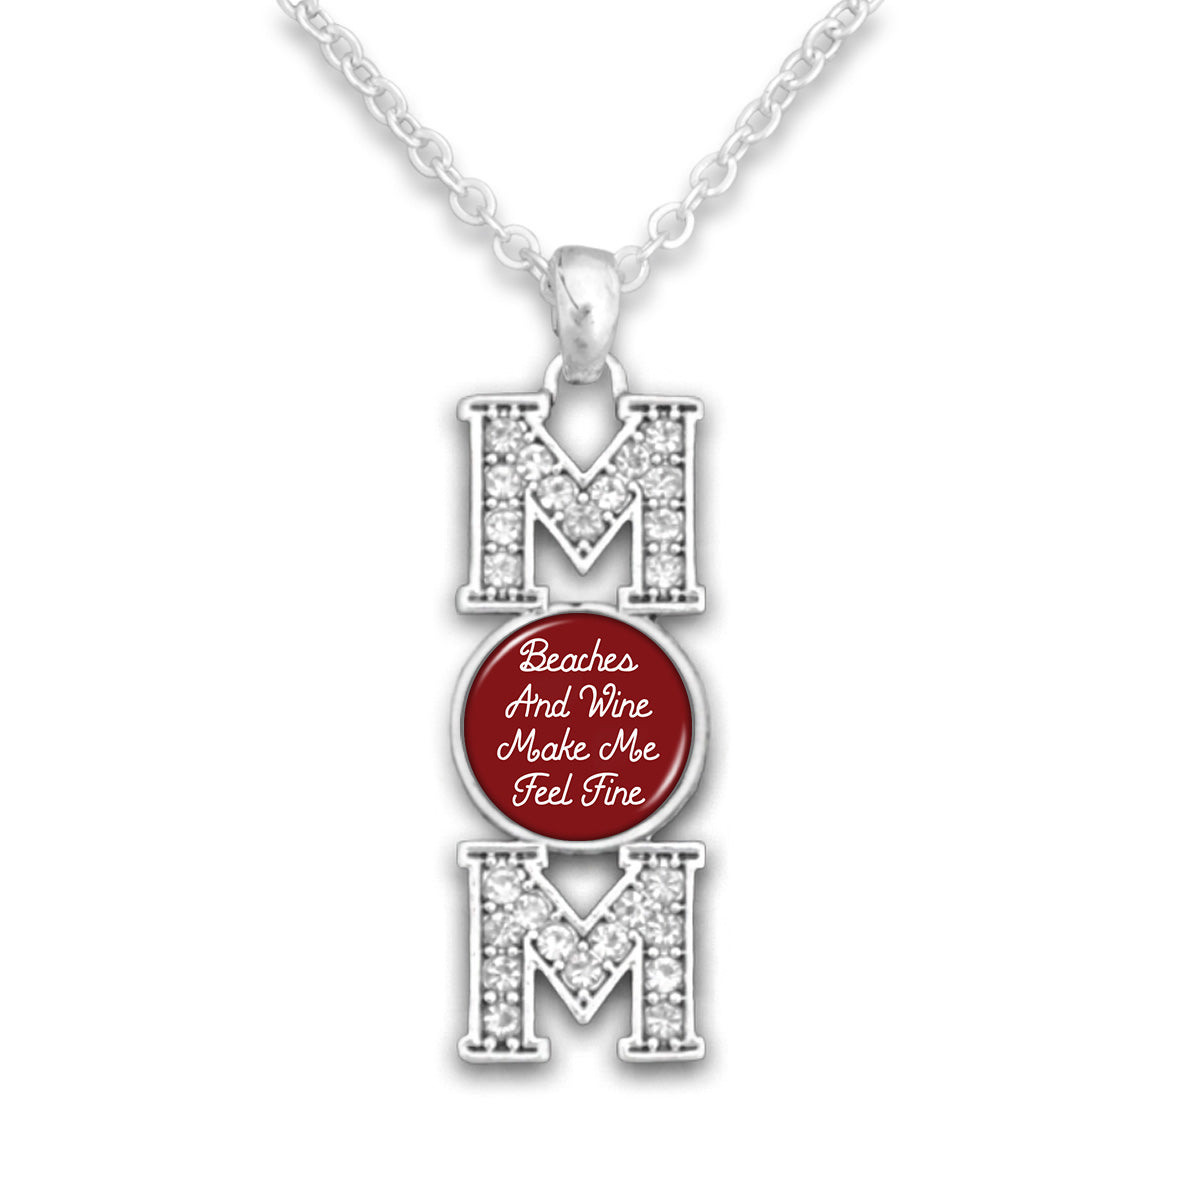 "Beaches and Wine Make Me Feel Fine" Mom's Pendant Necklace